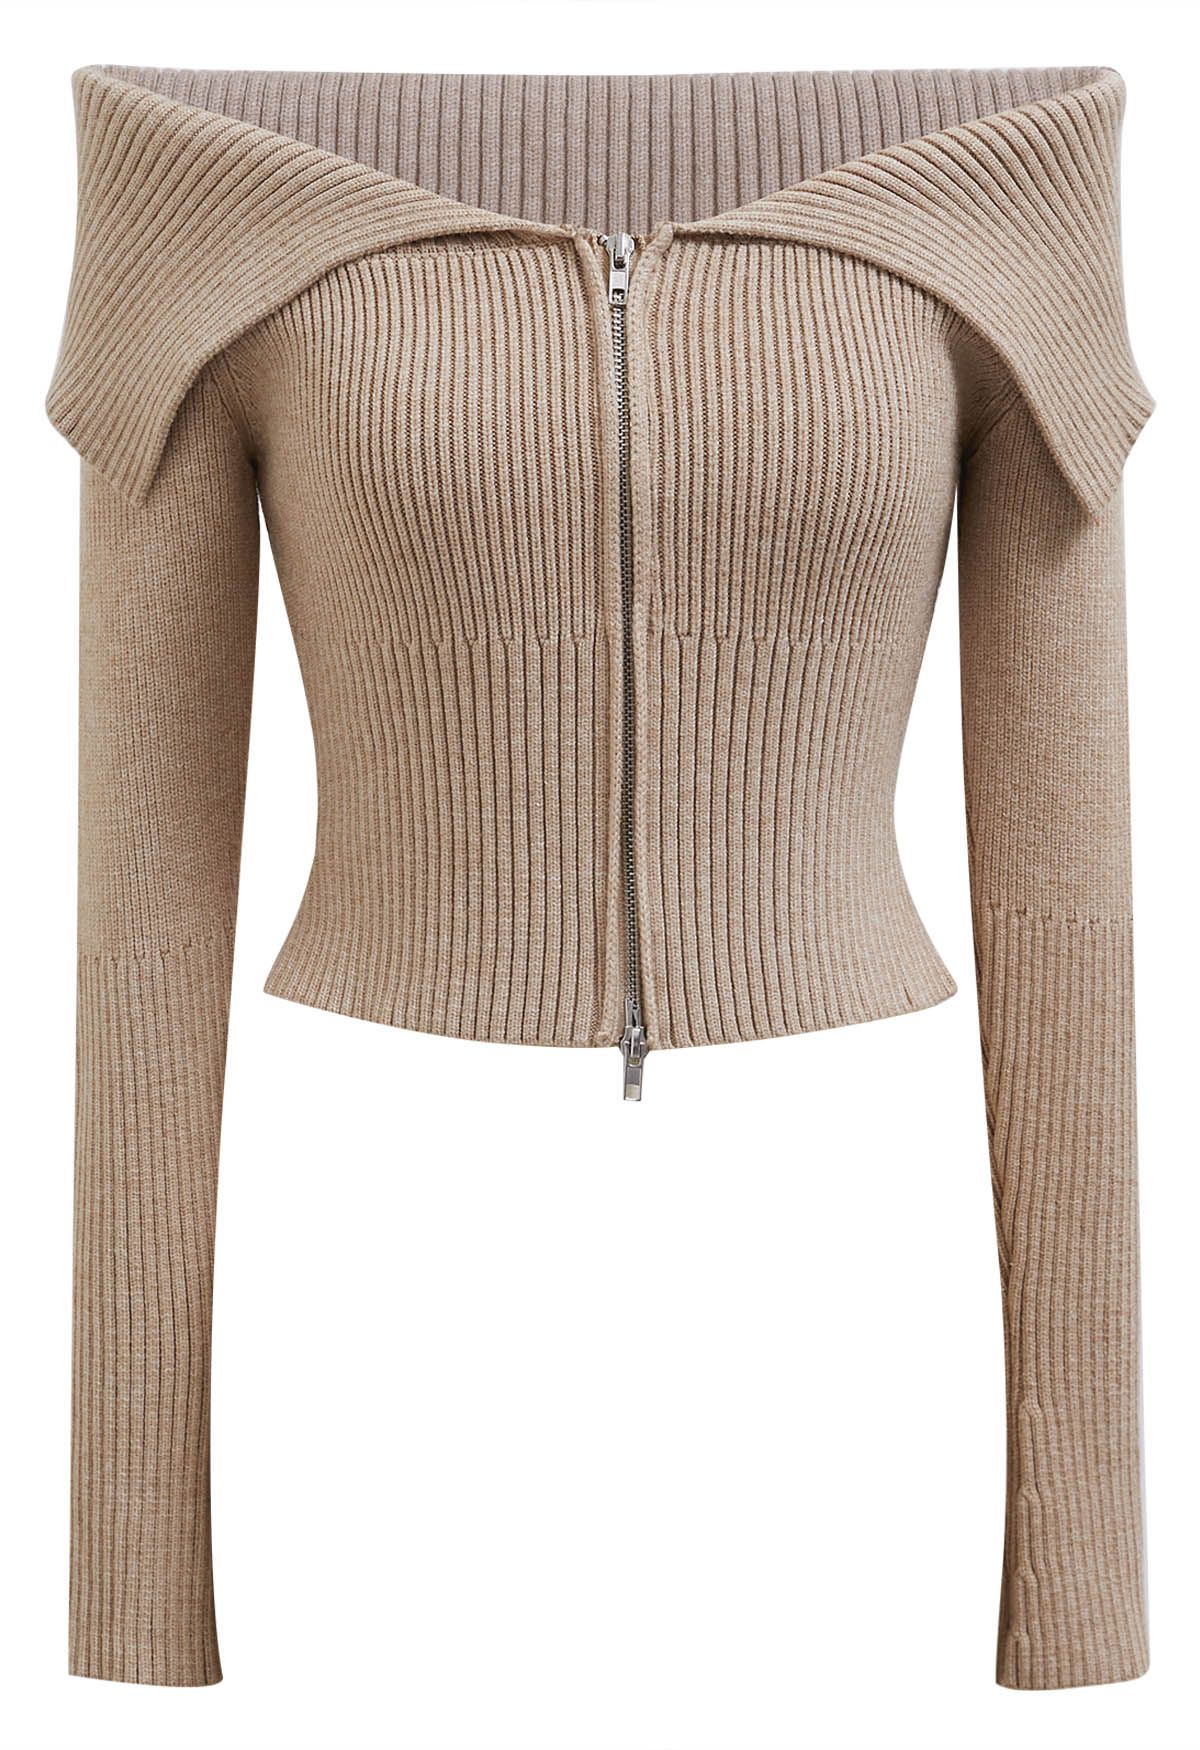 Flap Collar Zip Up Cropped Knit Top in Light Tan